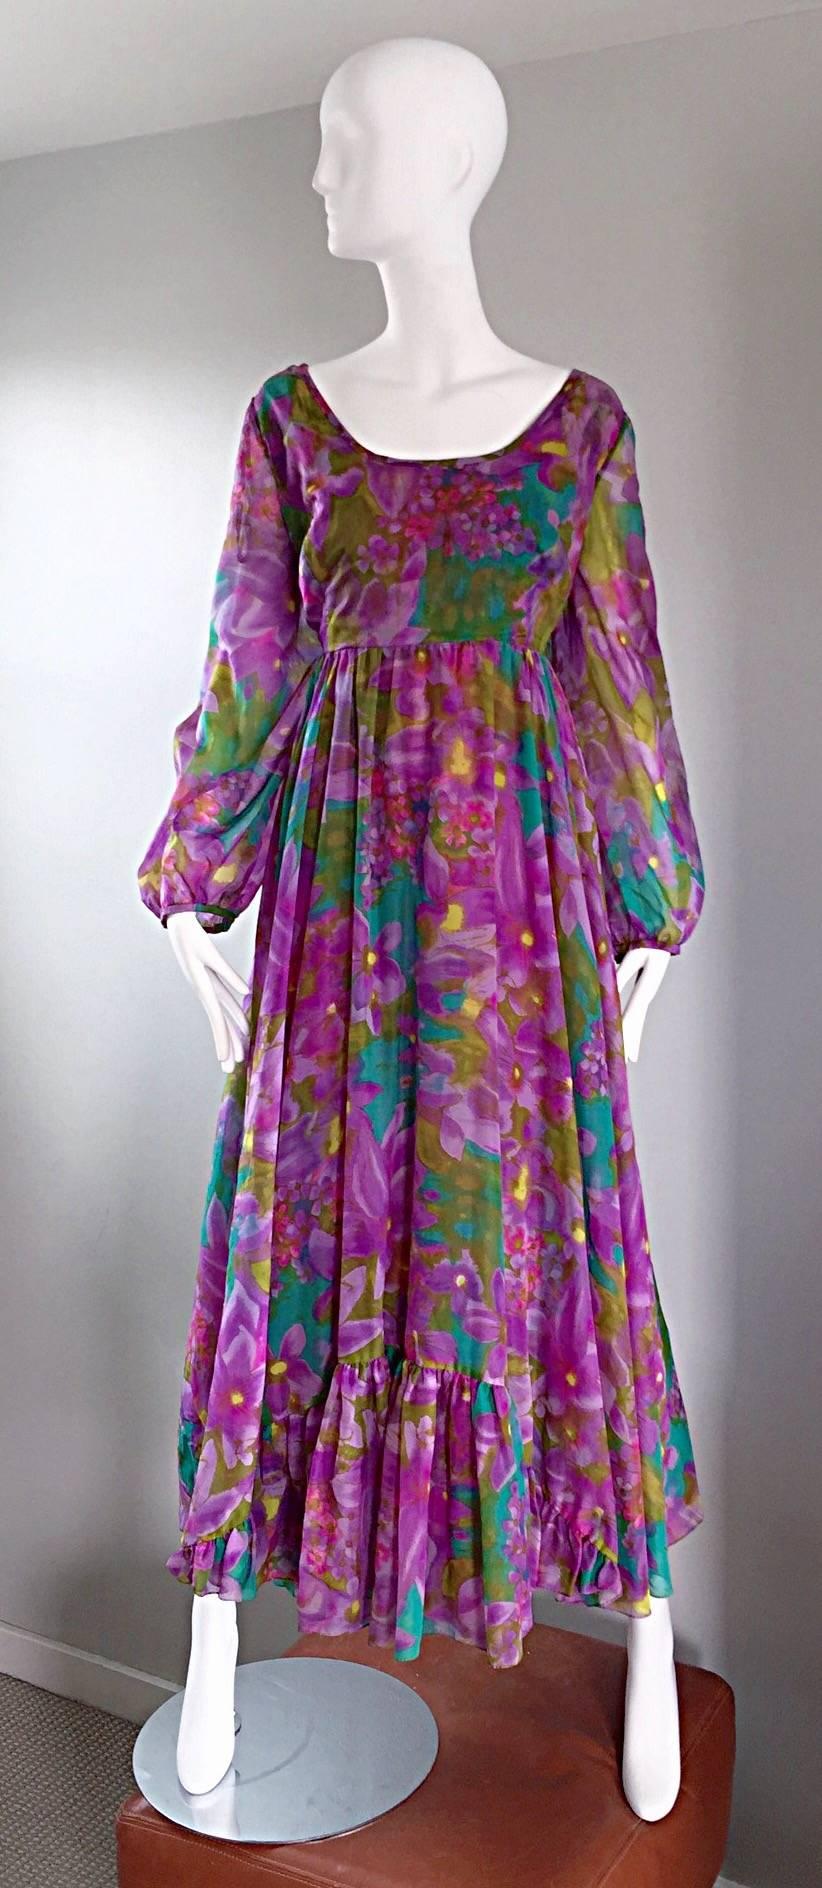 Sensational vintage 1970s MR BLACKWELL plus size maxi dress / gown! Vibrant hues of purples, blues, yellows and greens in a floral tropical print. Peasant style, with semi sheer billowy sleeves, and a full skirt. Ruffles at both the center front and